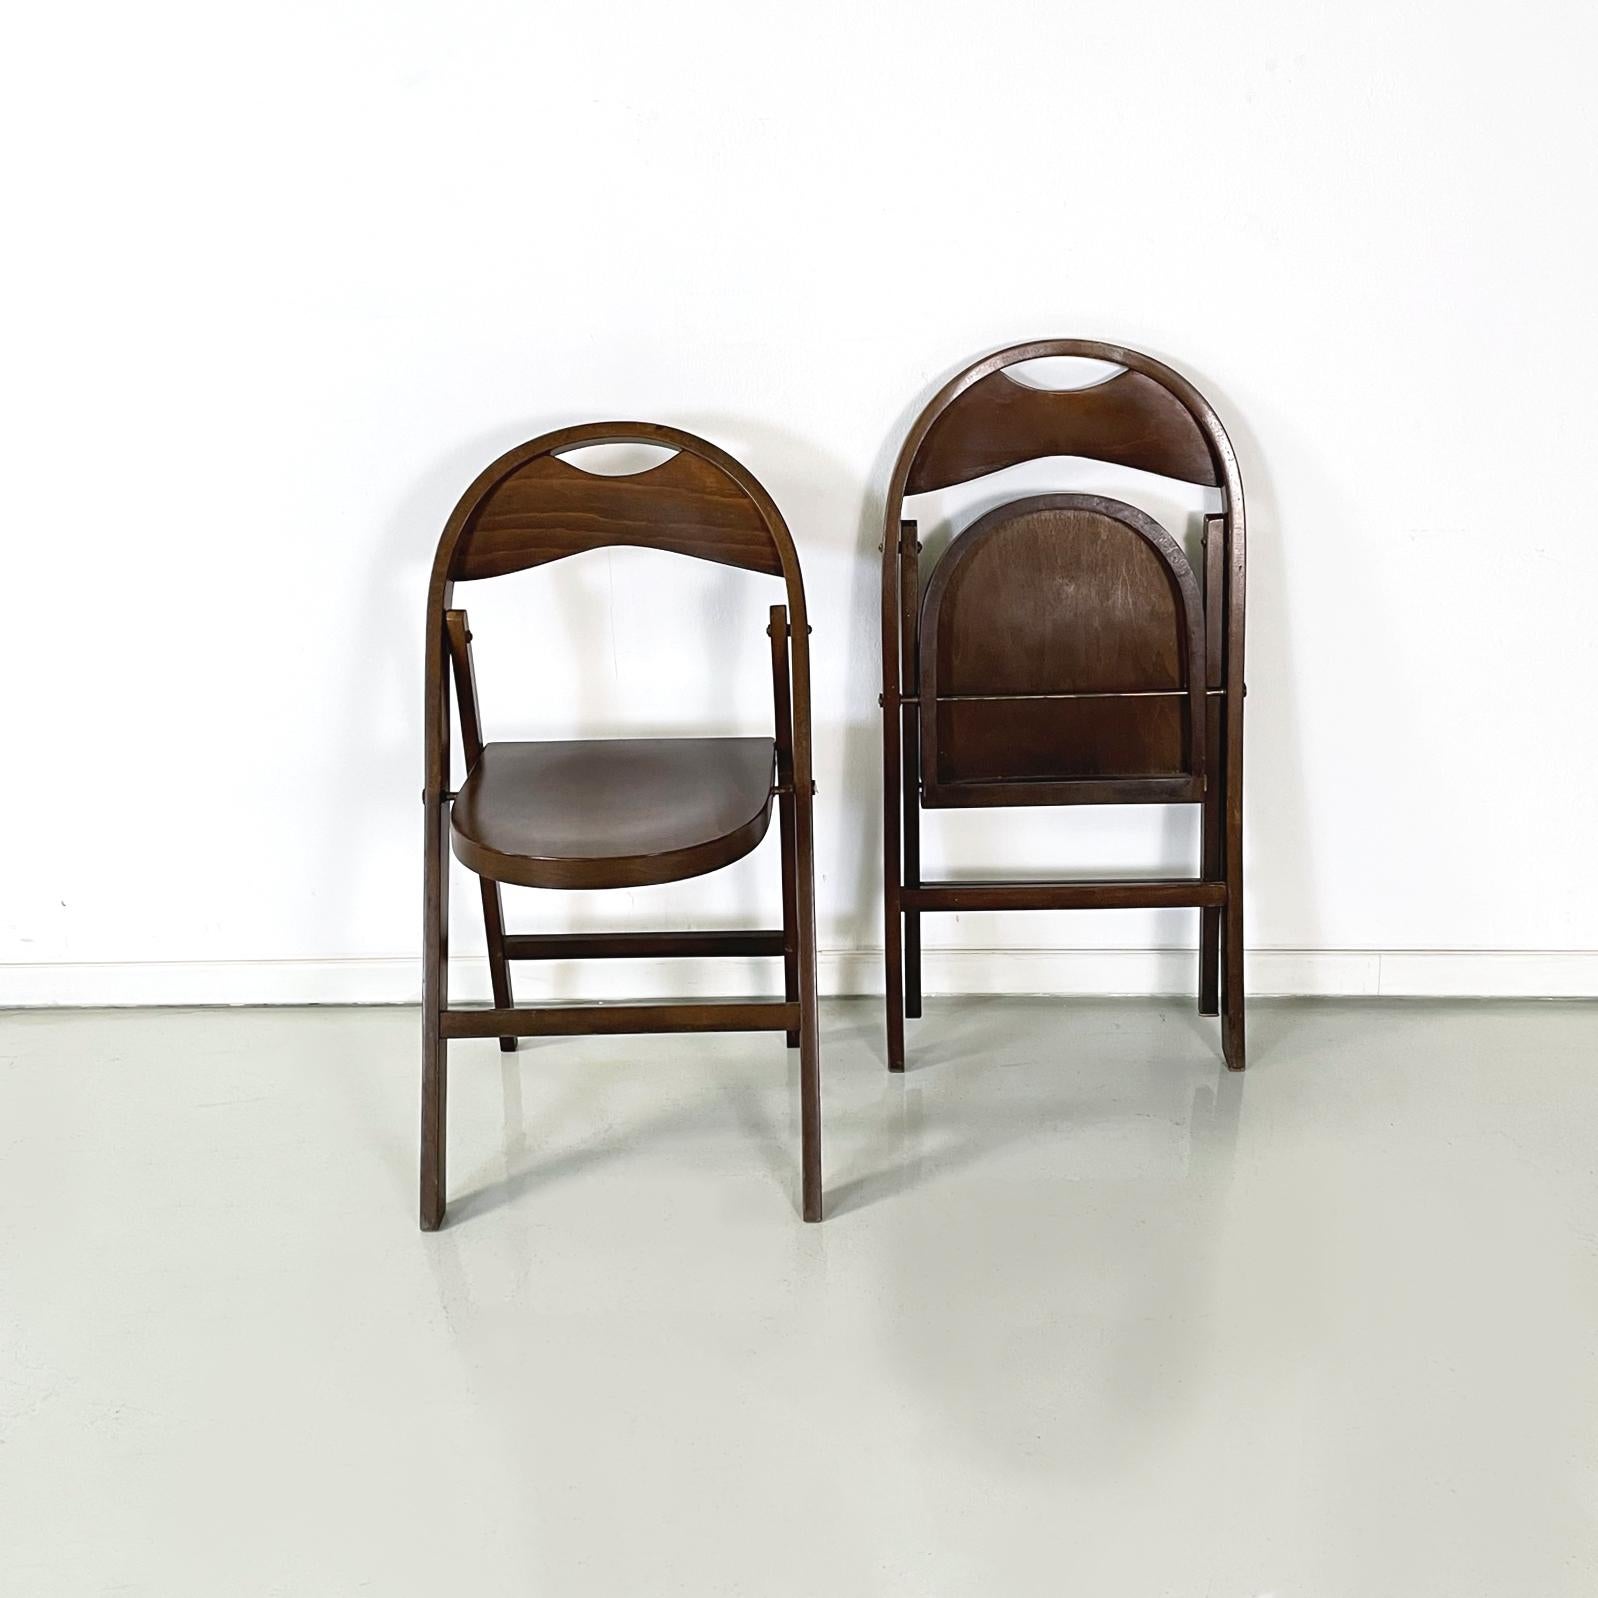 Italian mid-century Wooden folding chairs Tric by Achille and Pier Giacomo Castiglioni, 1960s
Set of 4 folding chairs mod. Tric entirely in dark wood. The seat and back are rounded. The legs are rectangular in section.
Produced in 1960s and